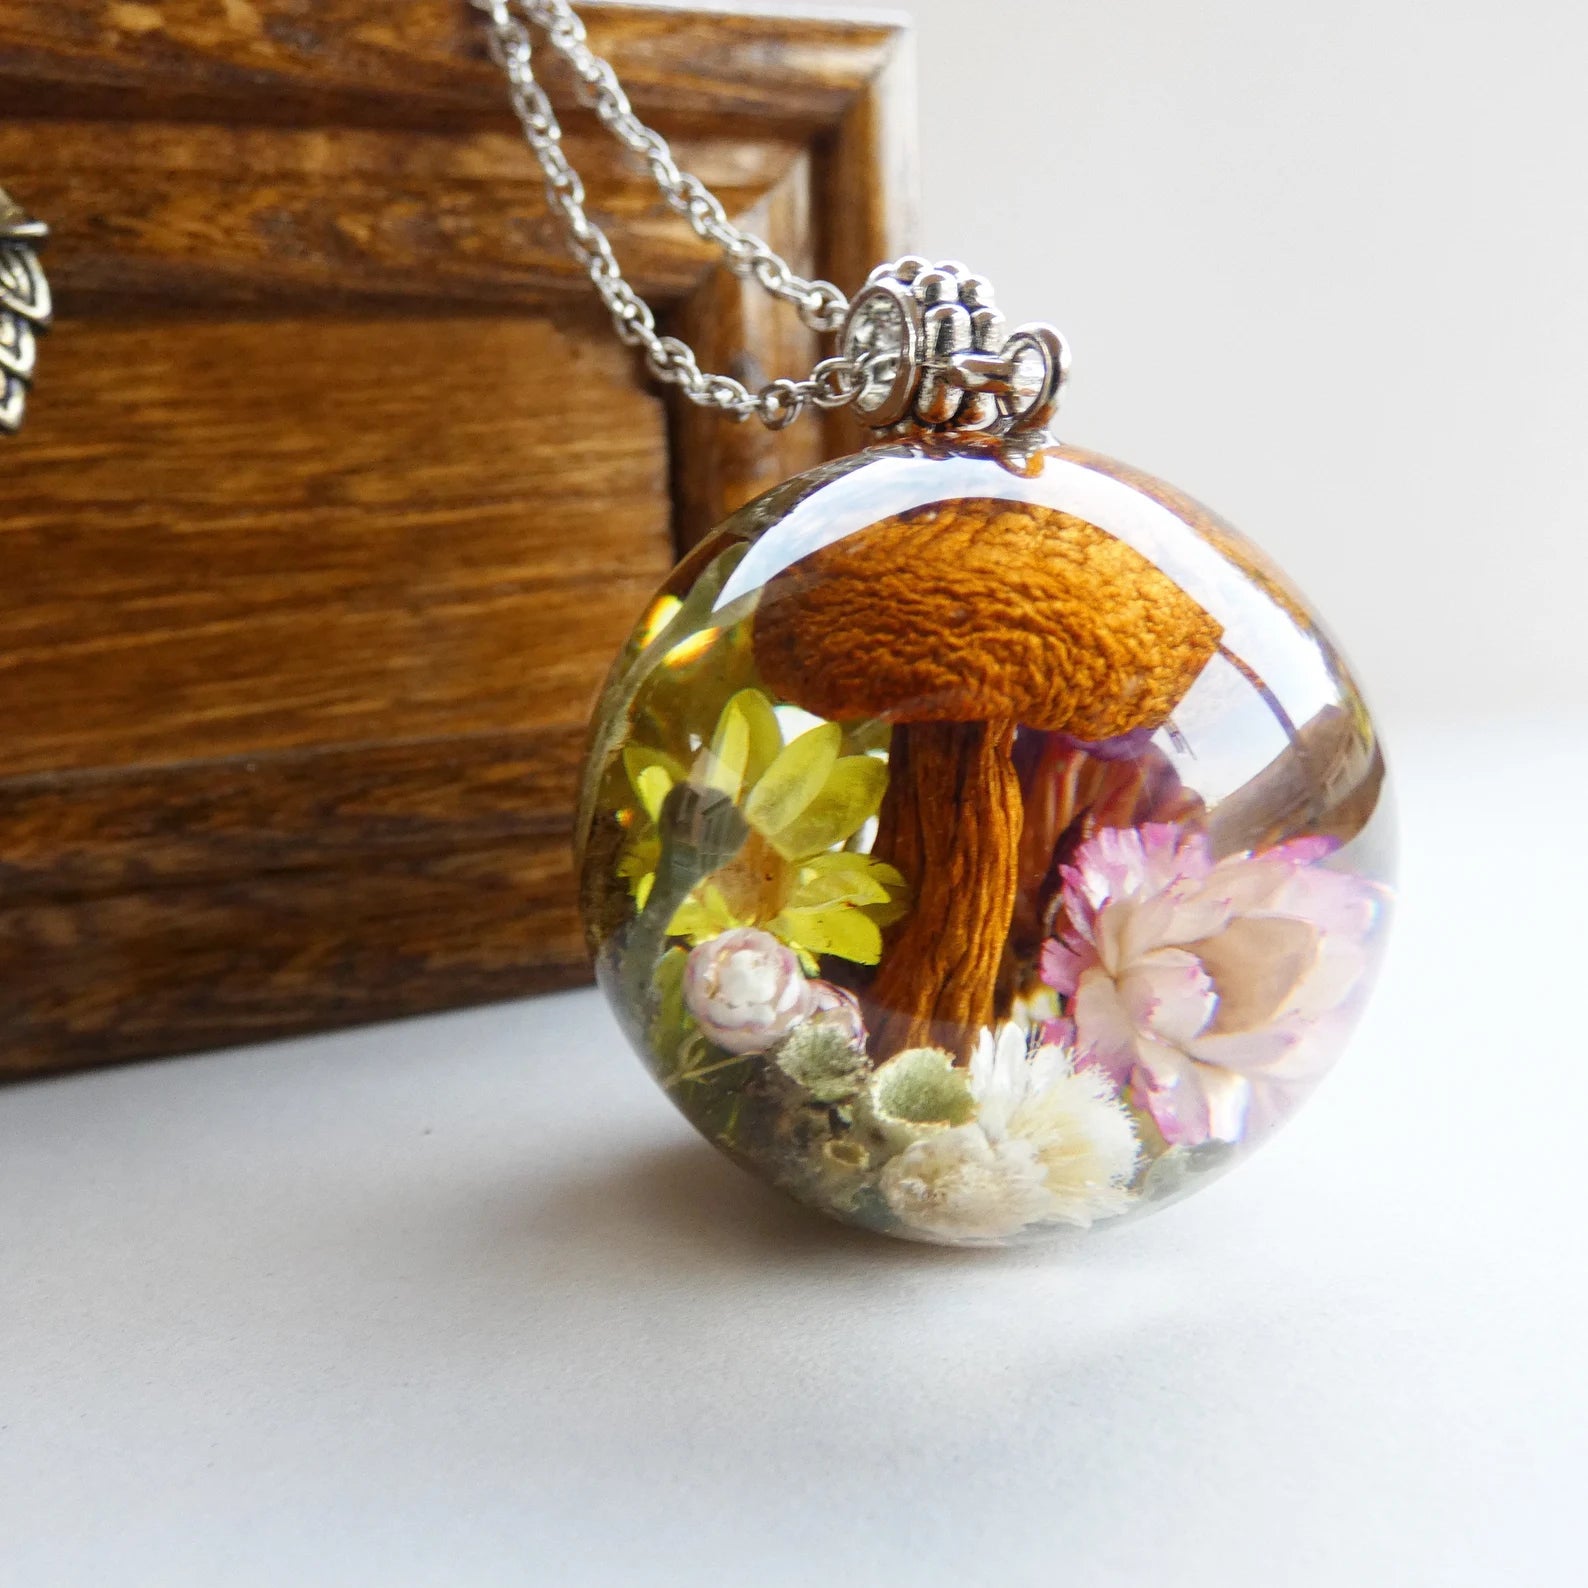 Woodland necklace, Terrarium necklace with real moss and mushrooms